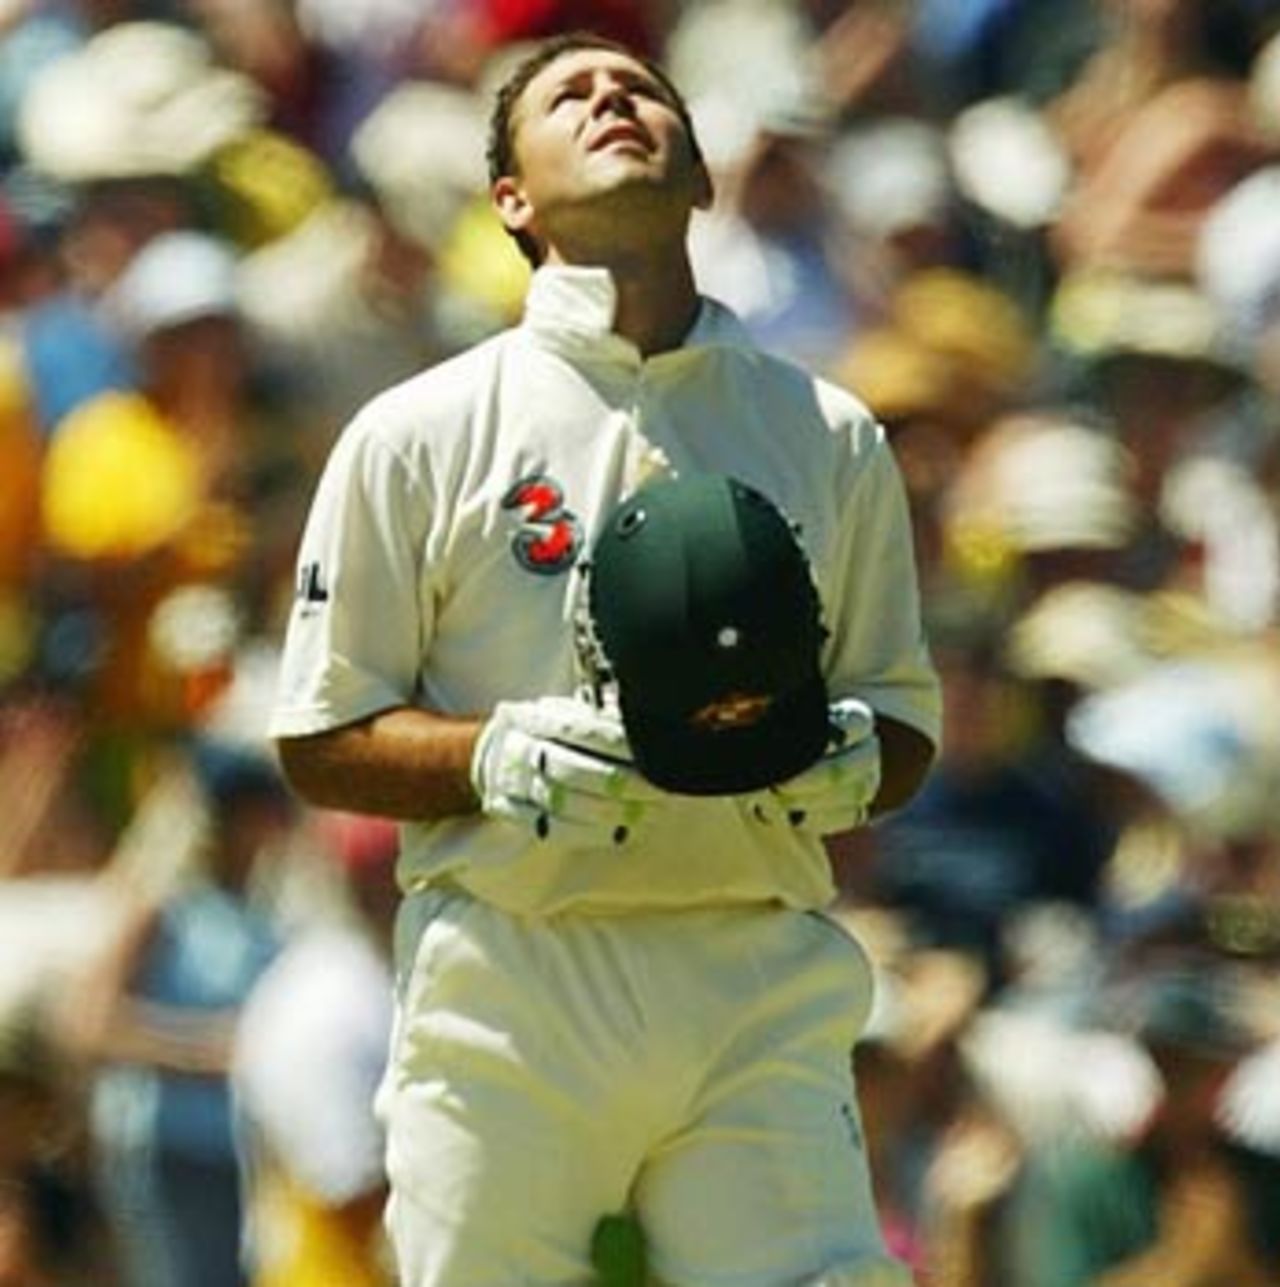 But there were no kisses for the Missus, Australia v India, 3rd Test, Melbourne, 3rd day, December 28, 2003